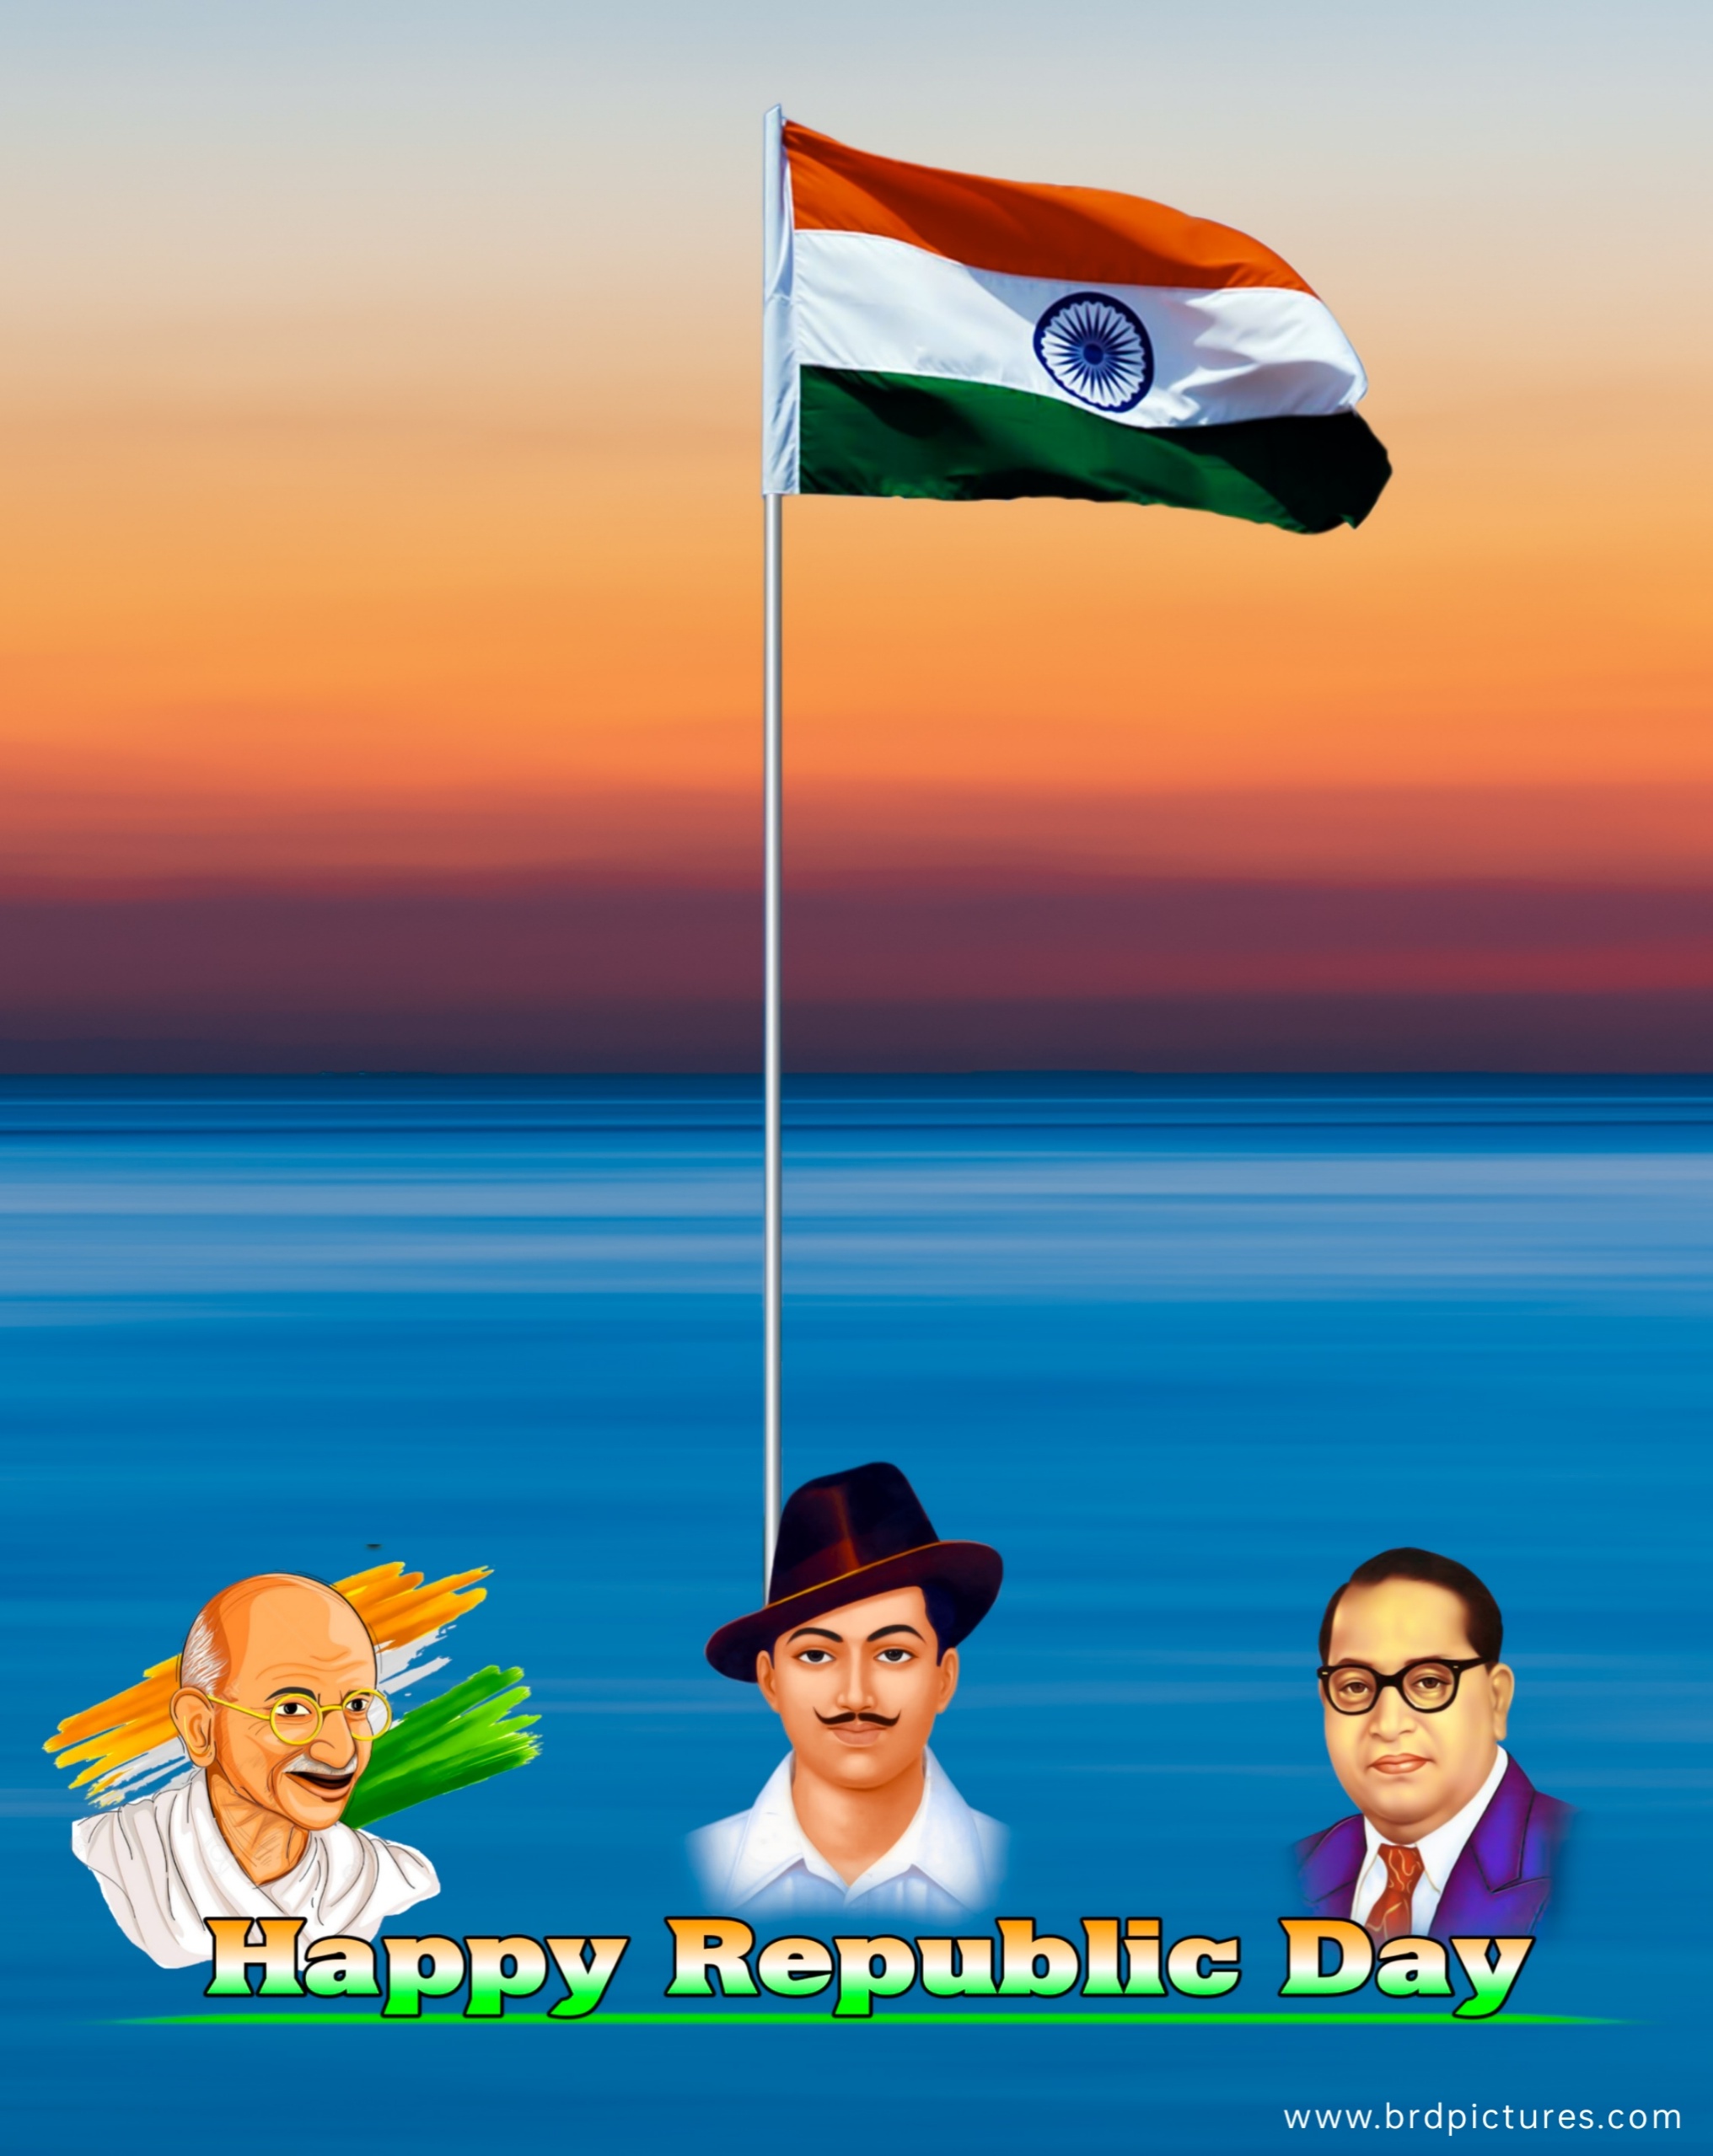 Happy Republic Day Image HD Download 